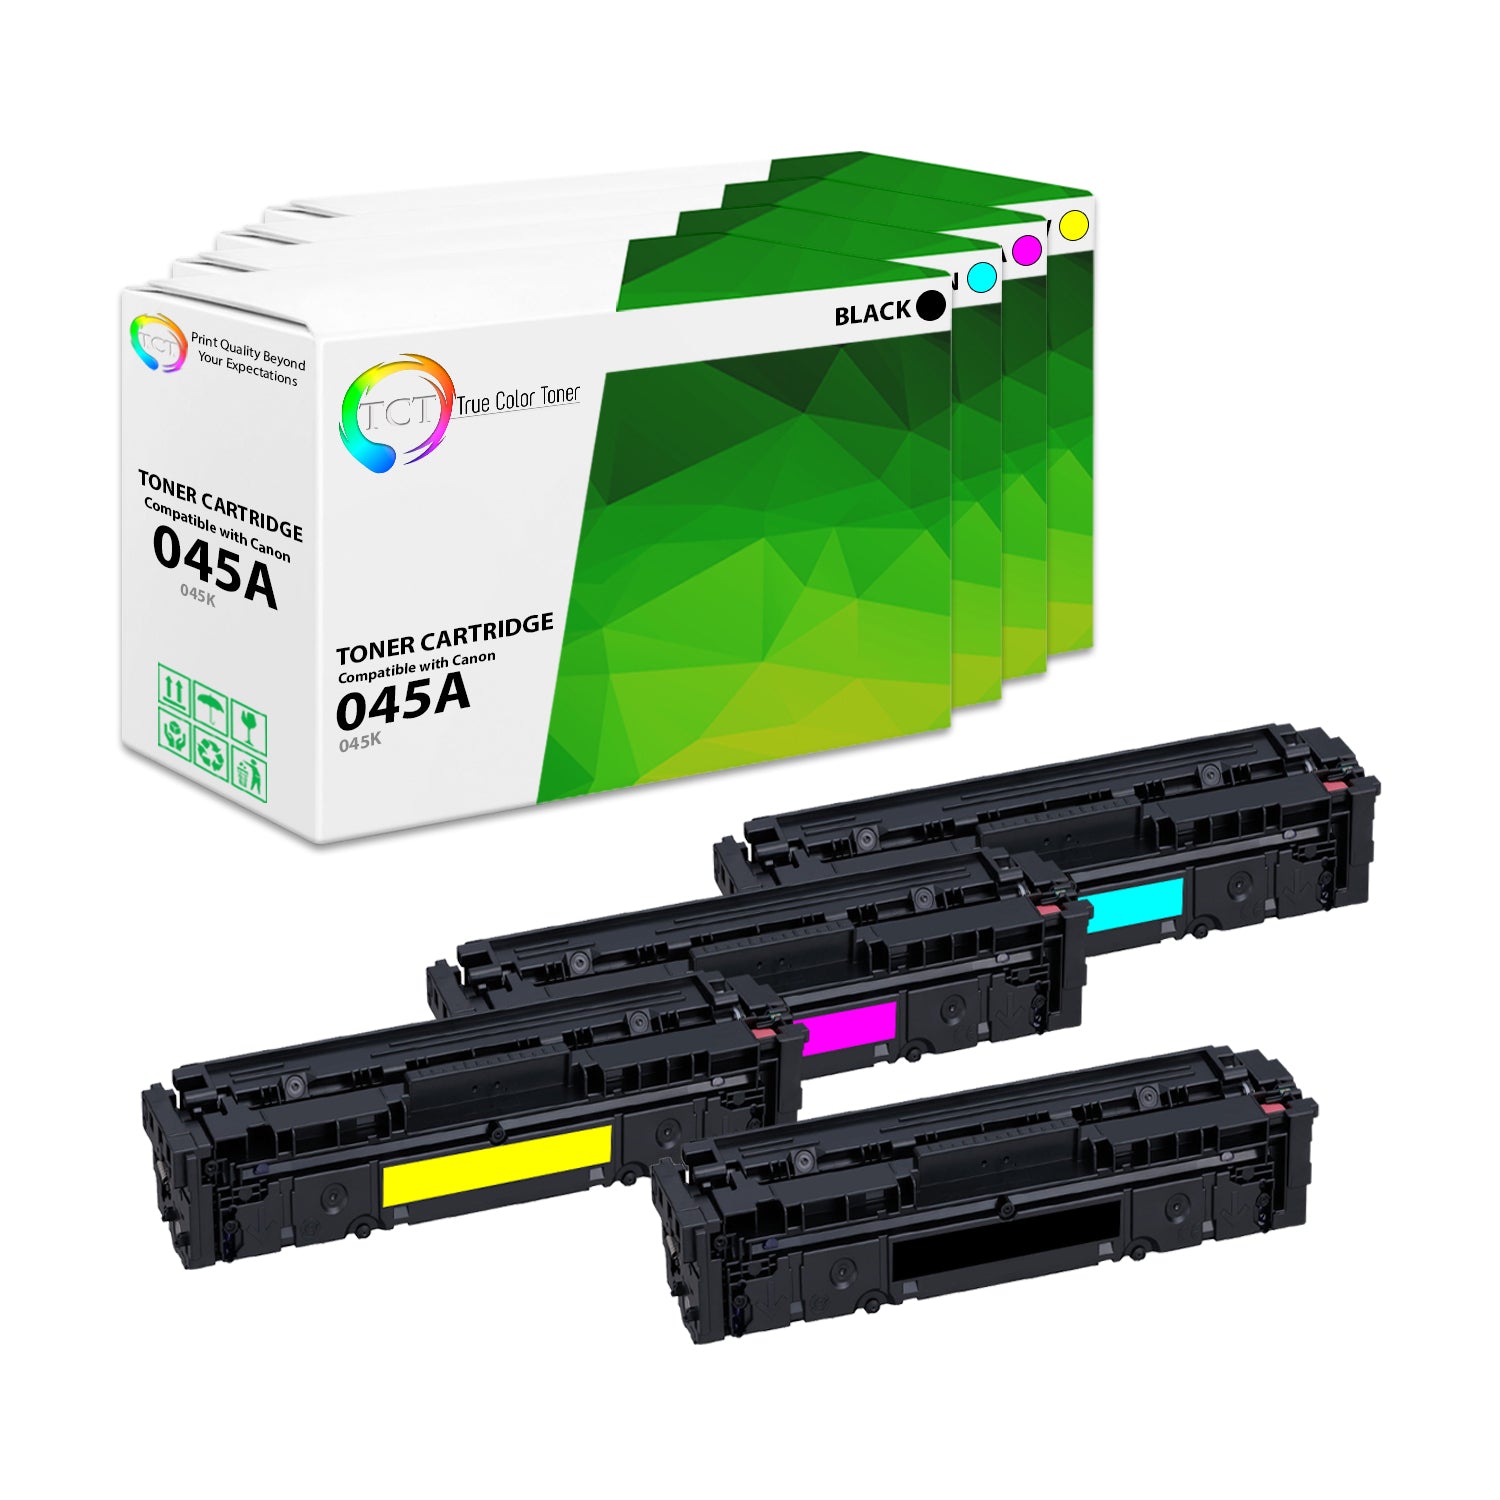 TCT Compatible Toner Cartridge Replacement for the Canon 045 Series - 4 Pack (BK, C, M, Y)